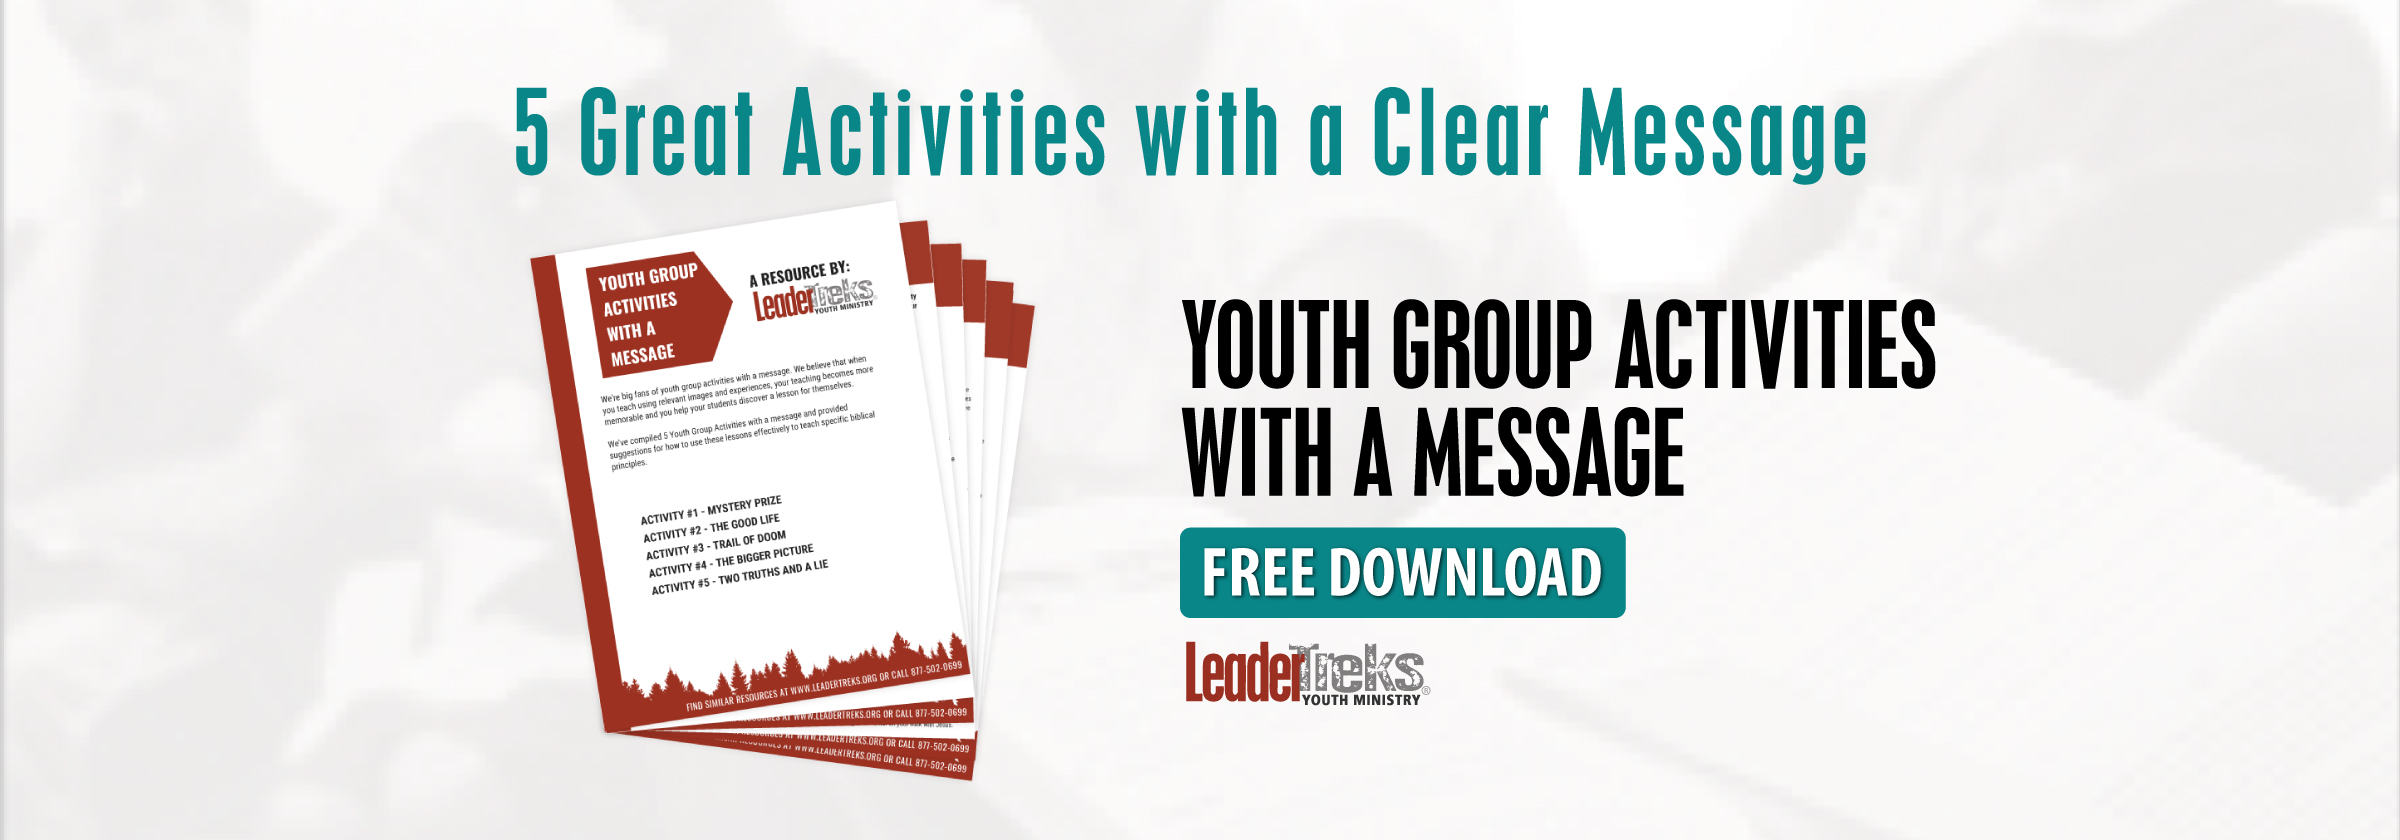 Lessons youth and activities ministry 